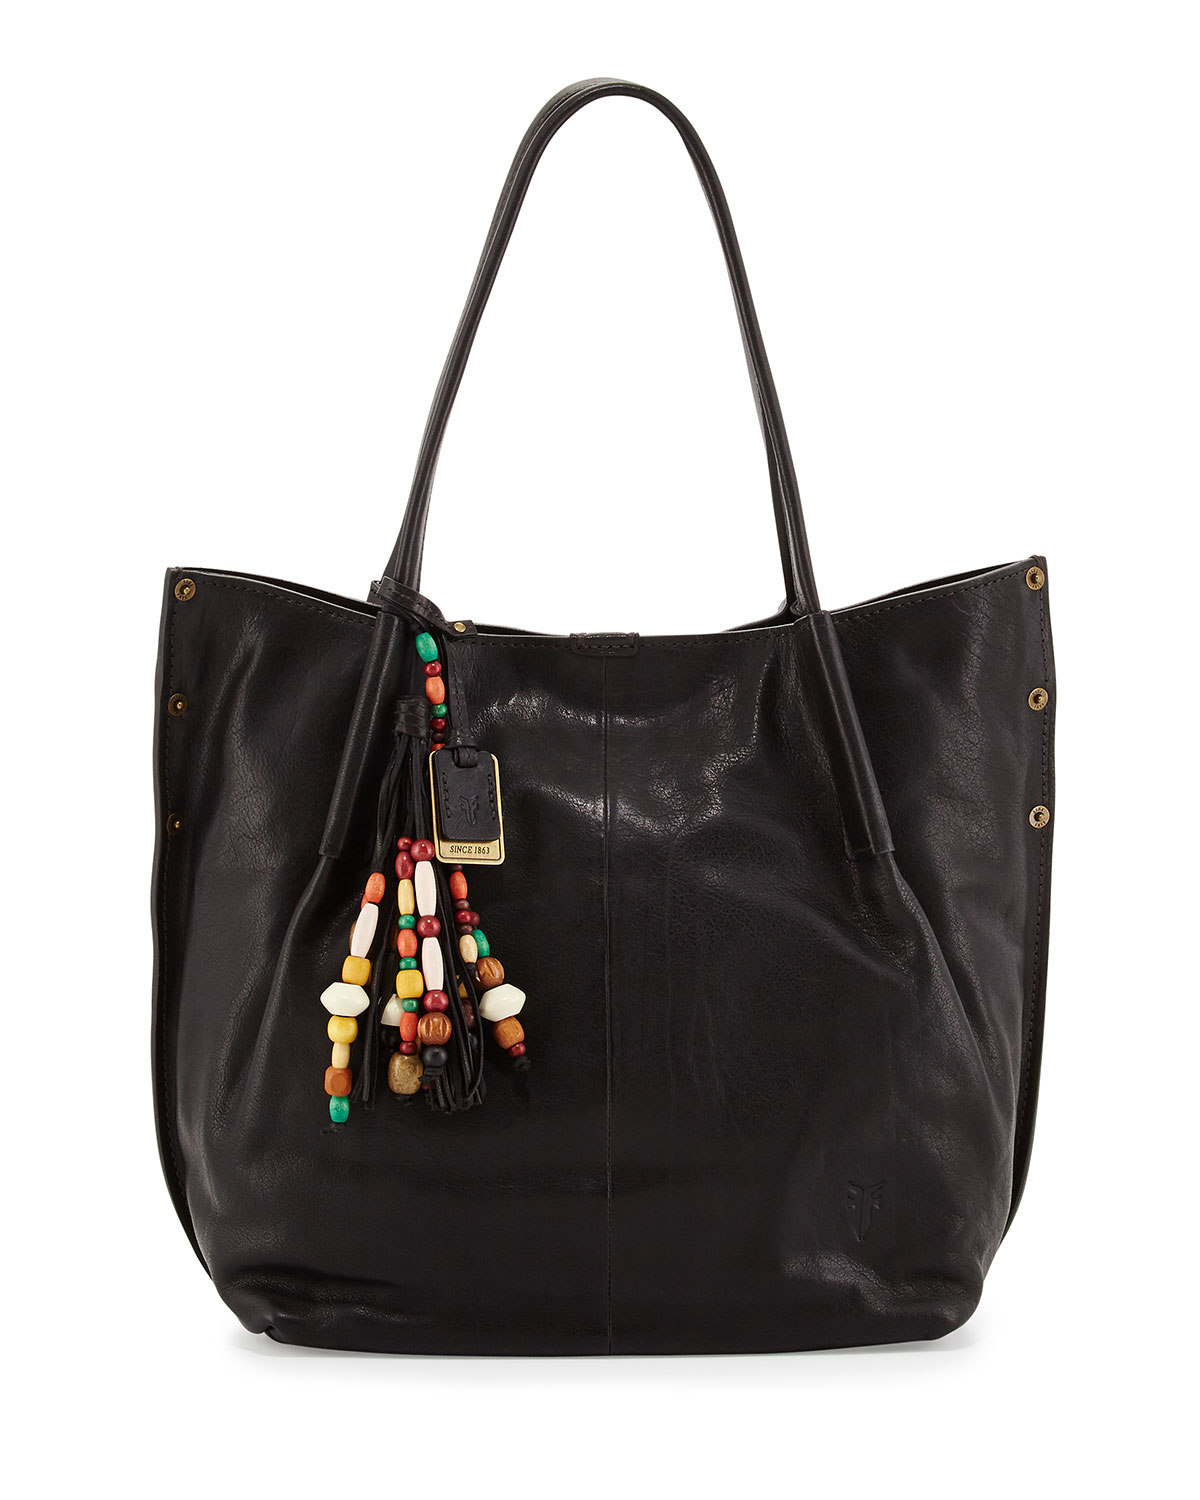 Lyst - Frye Hillary Leather Tote Bag in Black